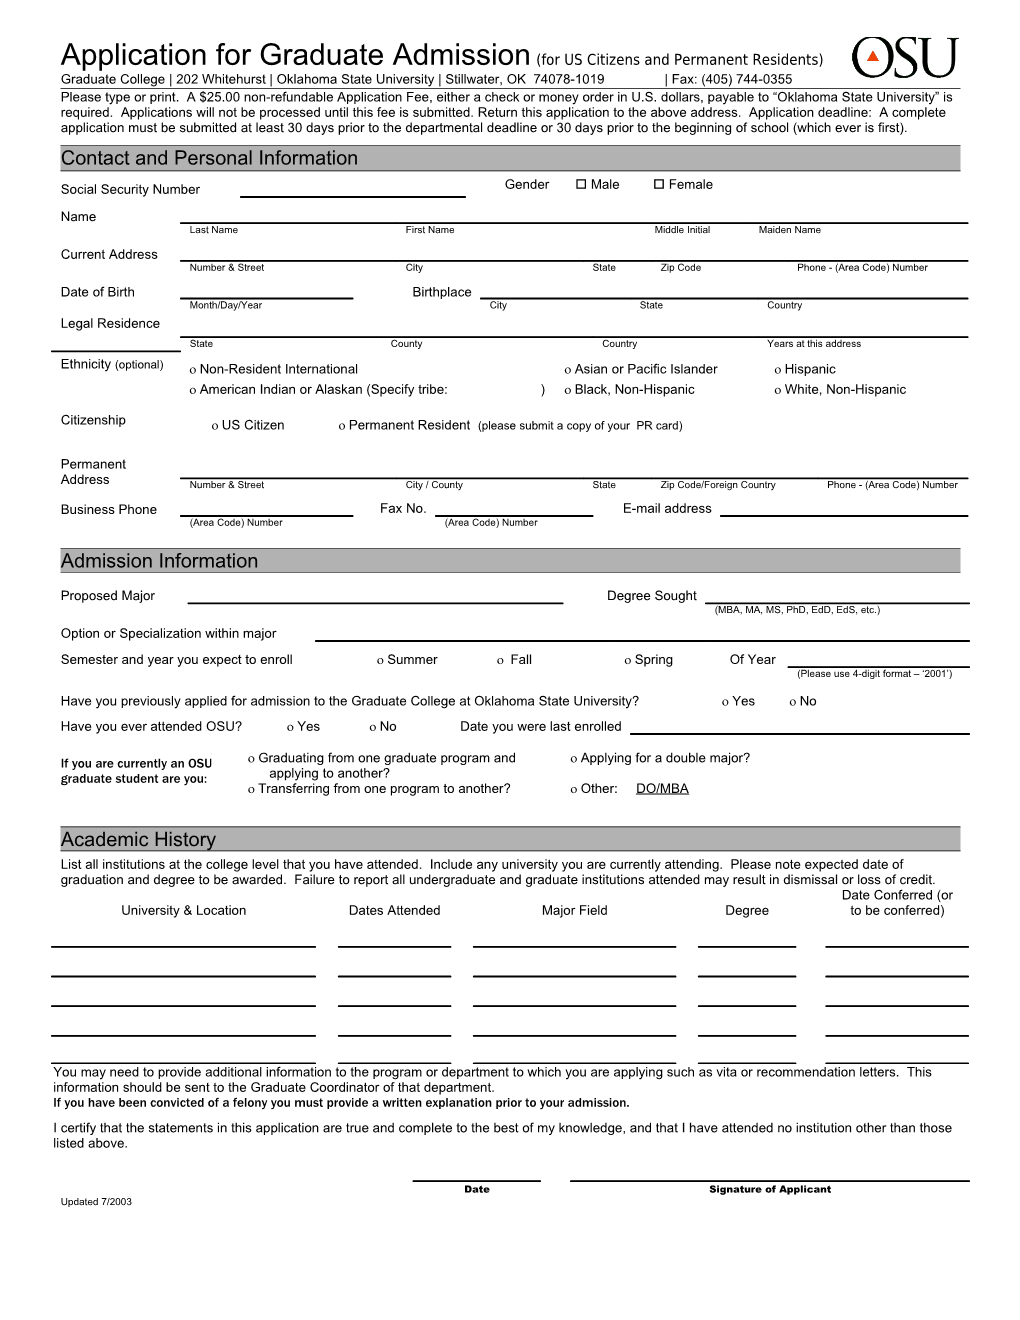 Graduate Application for Admission